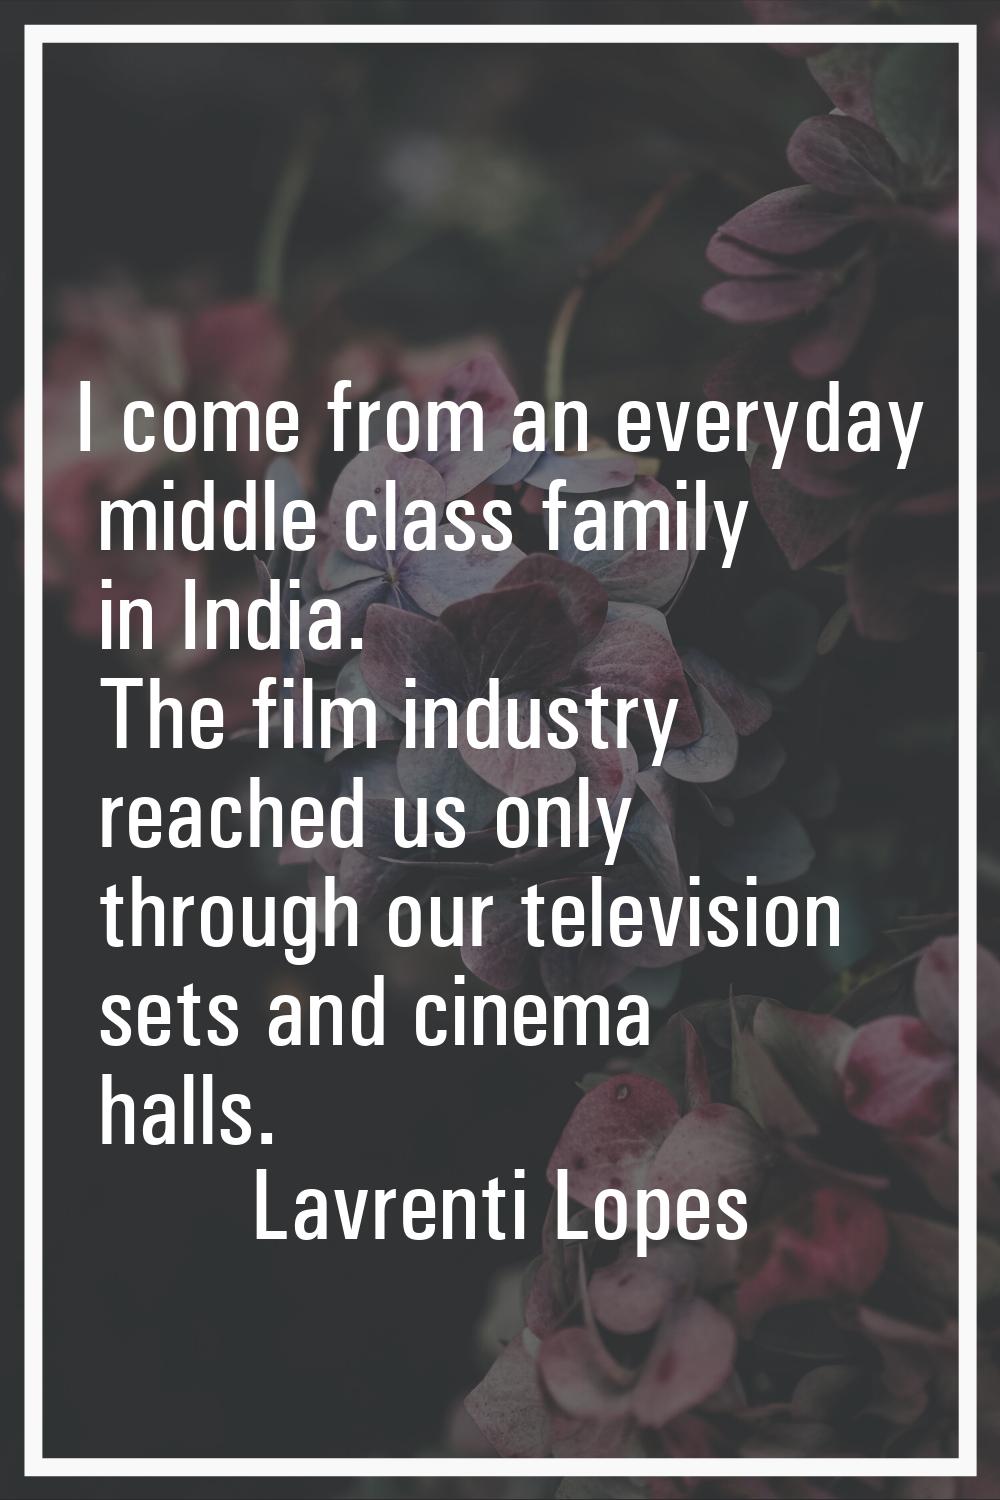 I come from an everyday middle class family in India. The film industry reached us only through our